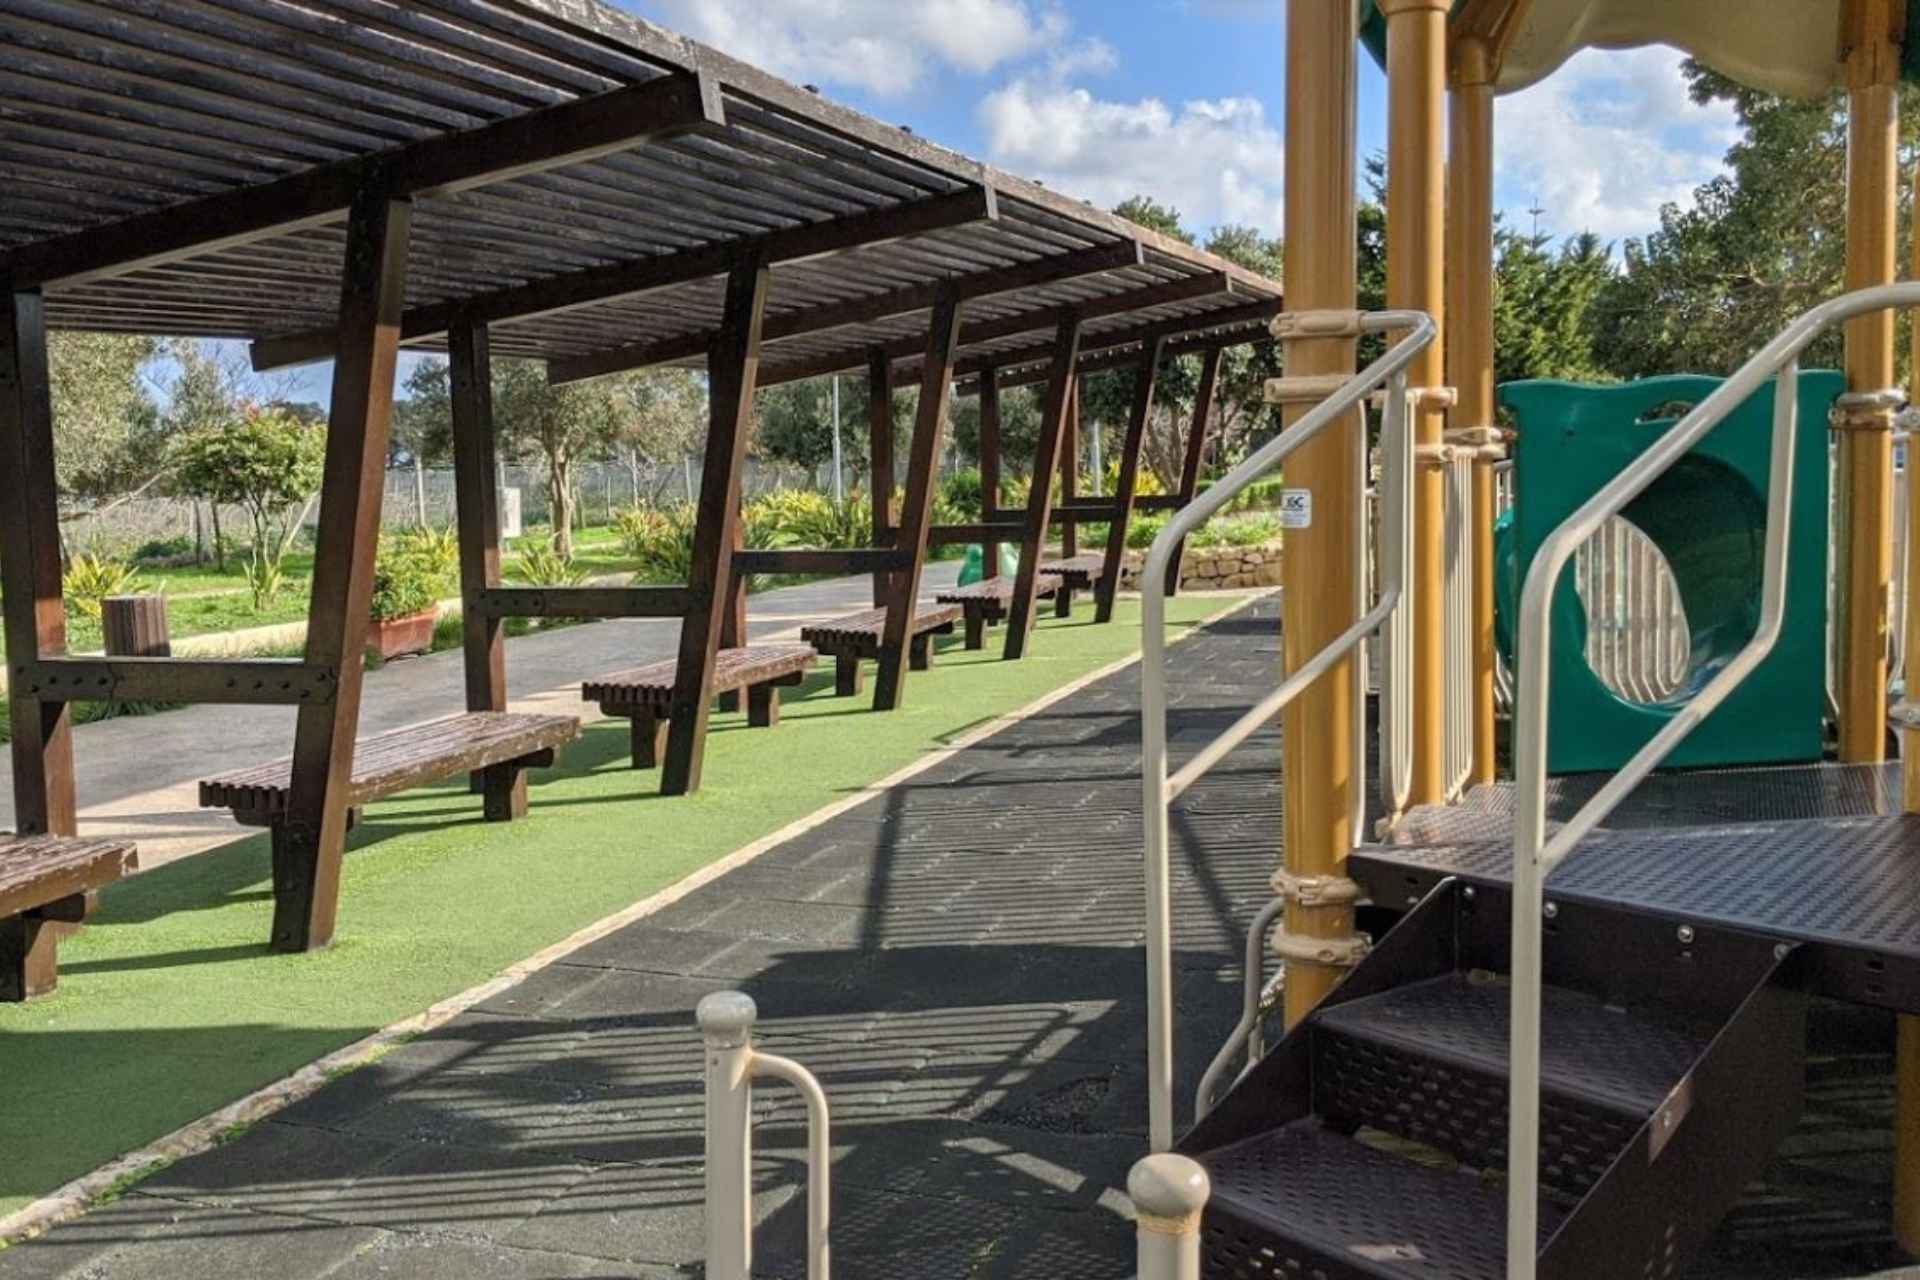 a row of wooden sheltered benches facing a playground